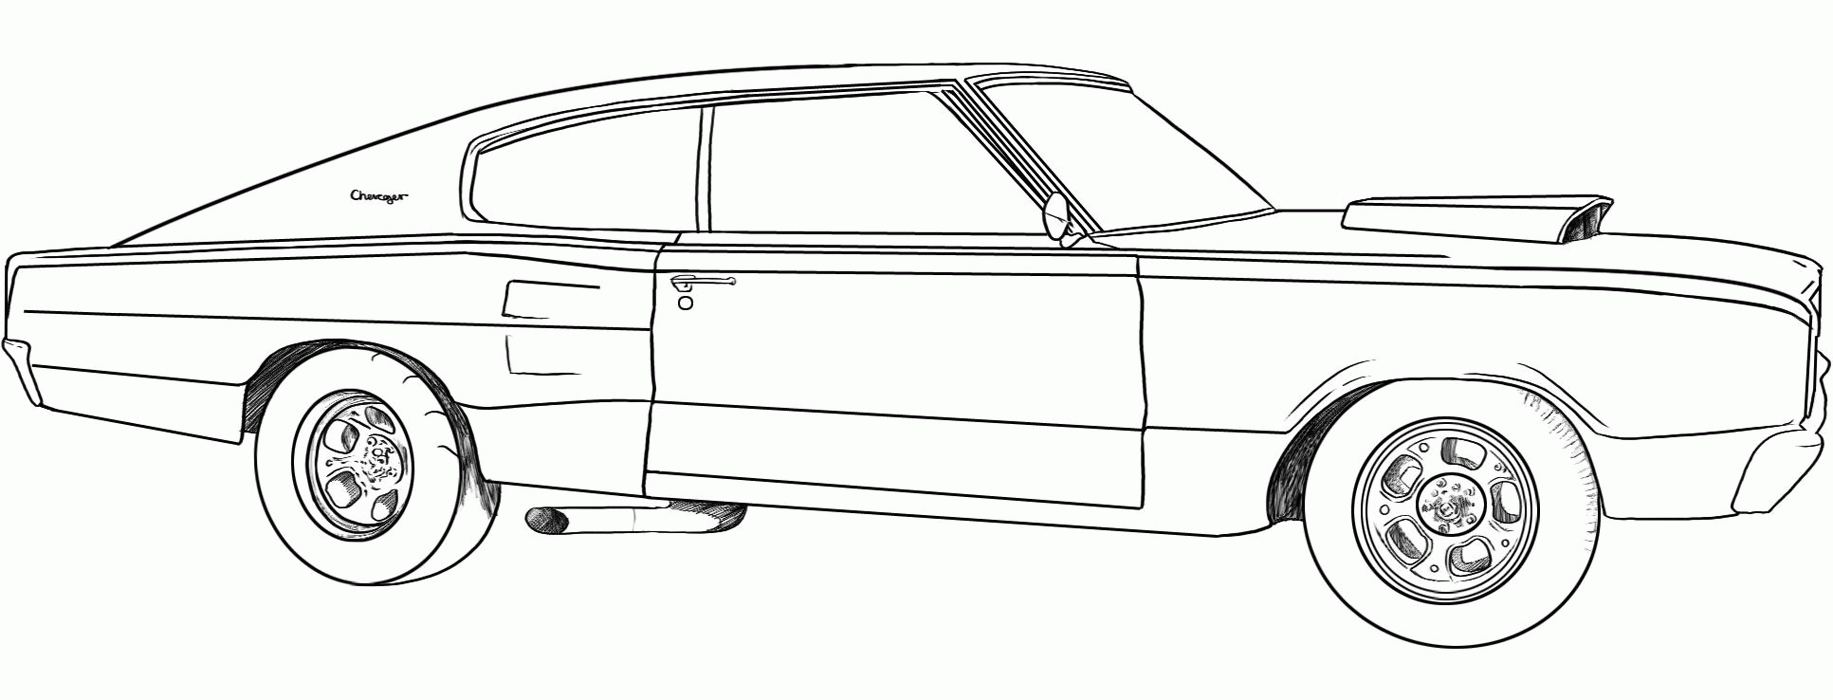 Corvette coloring pages to download and print for free - Coloringtop